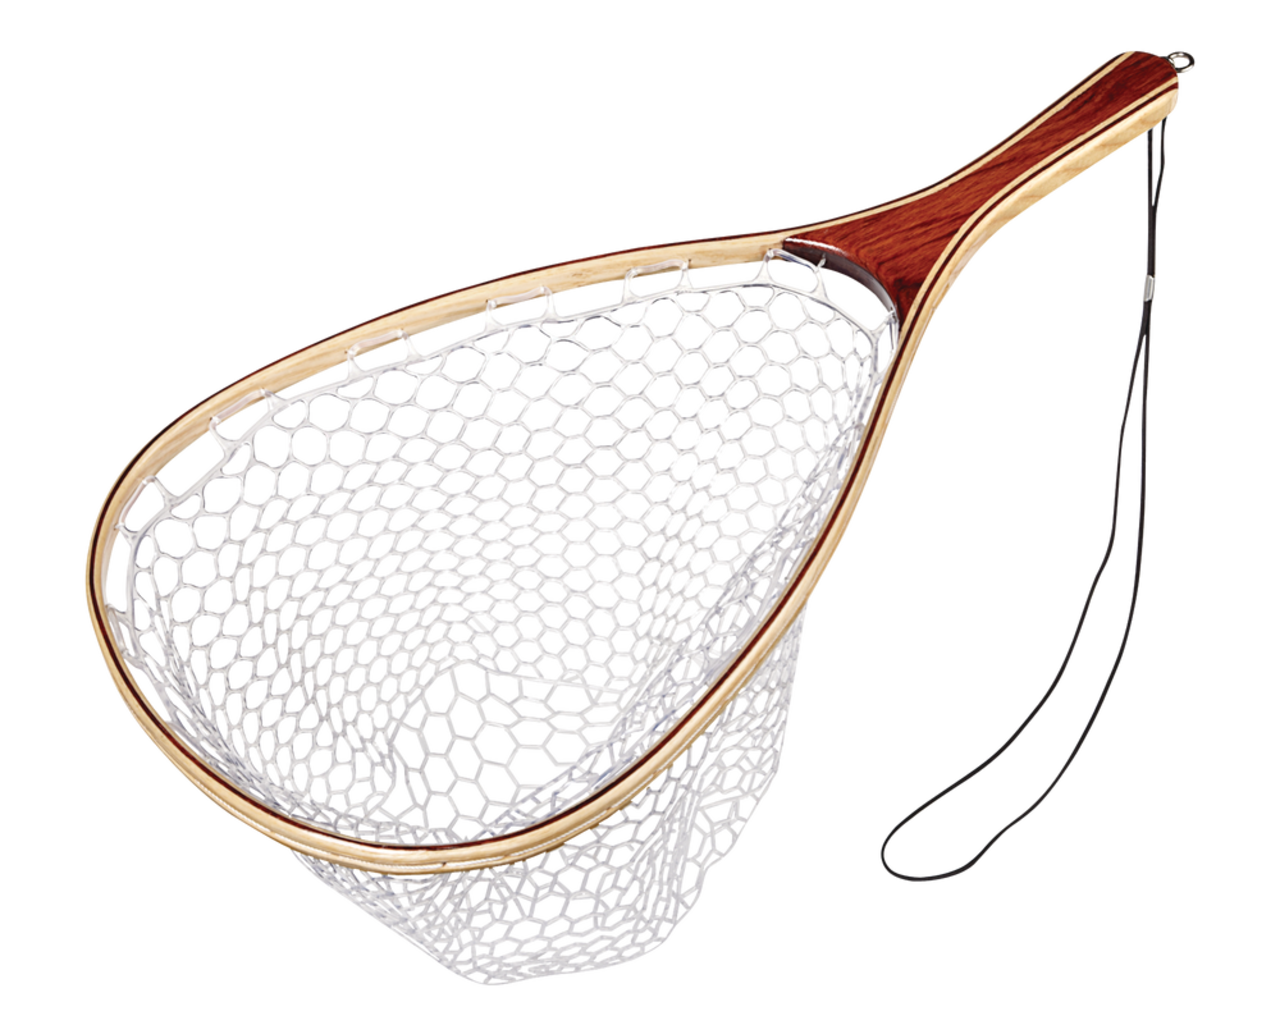 https://media-www.canadiantire.ca/product/playing/fishing/fishing-accessories/0784055/lucky-strike-wooden-net-with-rubber-mesh-6e78d388-8b47-4dd0-9690-f62fd8d954da.png?imdensity=1&imwidth=1244&impolicy=mZoom